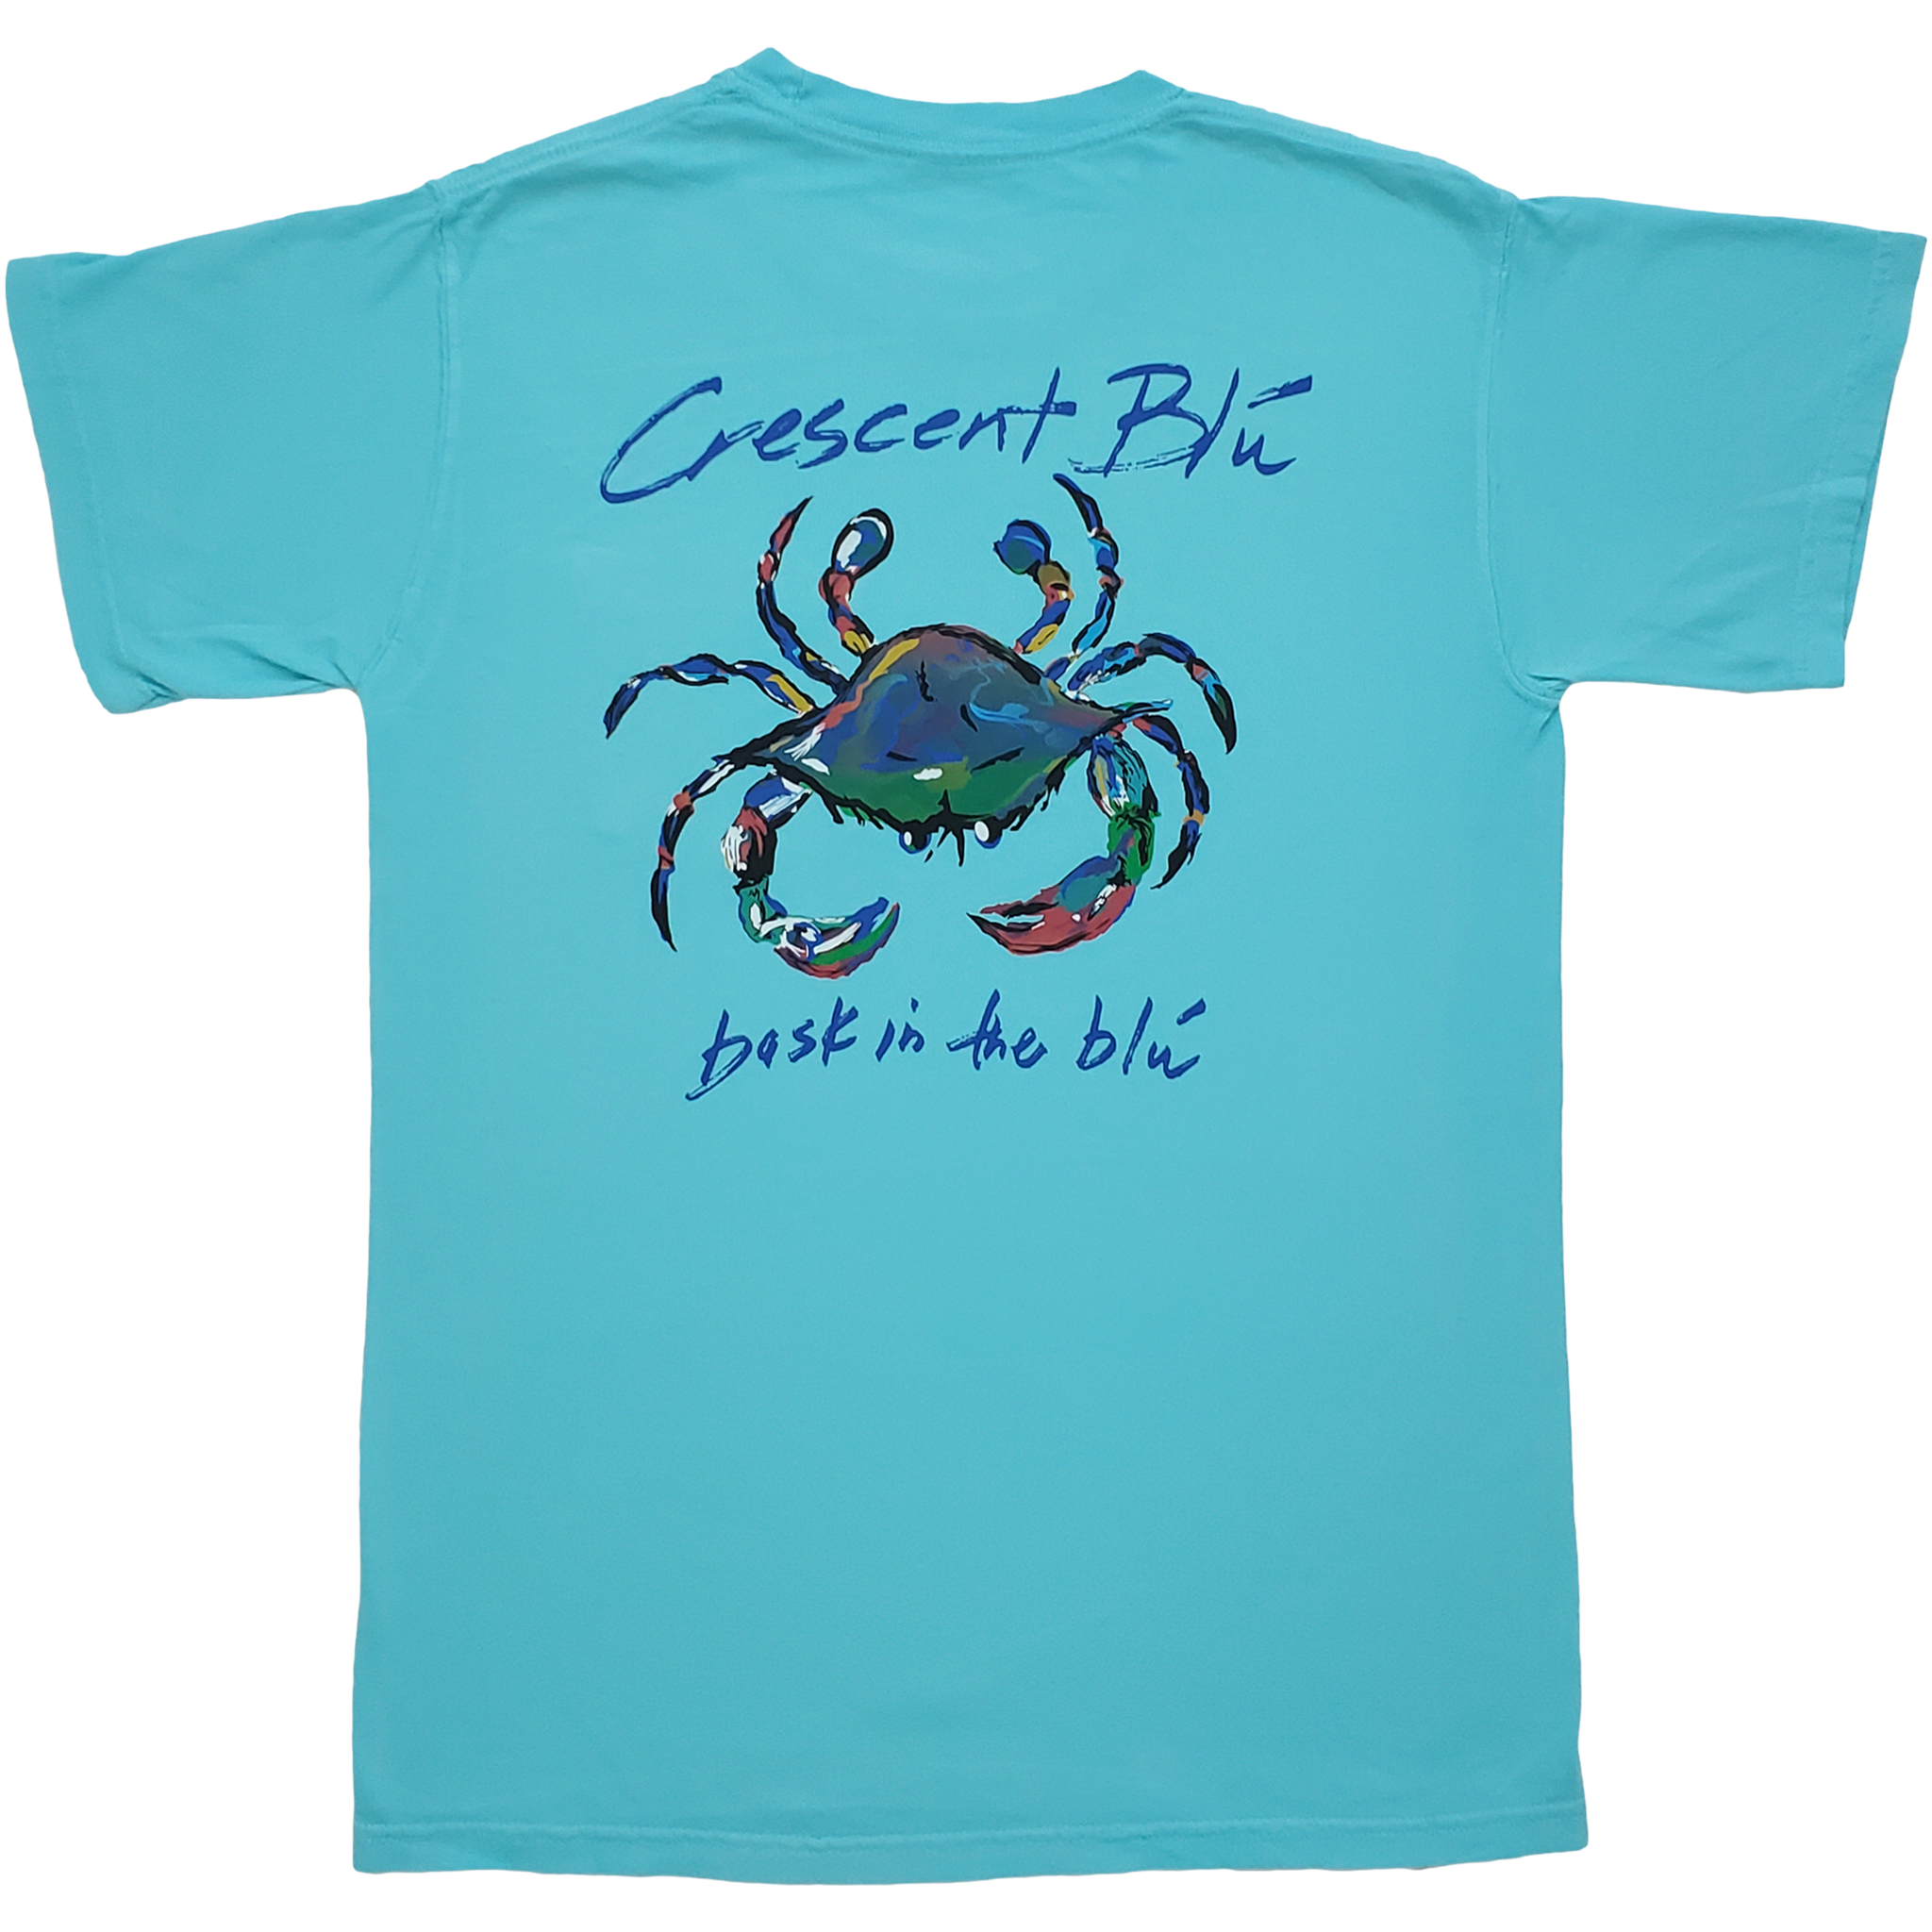 Image of the back of a Lagoon Blue Adult Short Sleeve Tee with colorful, vibrant crab image printed large